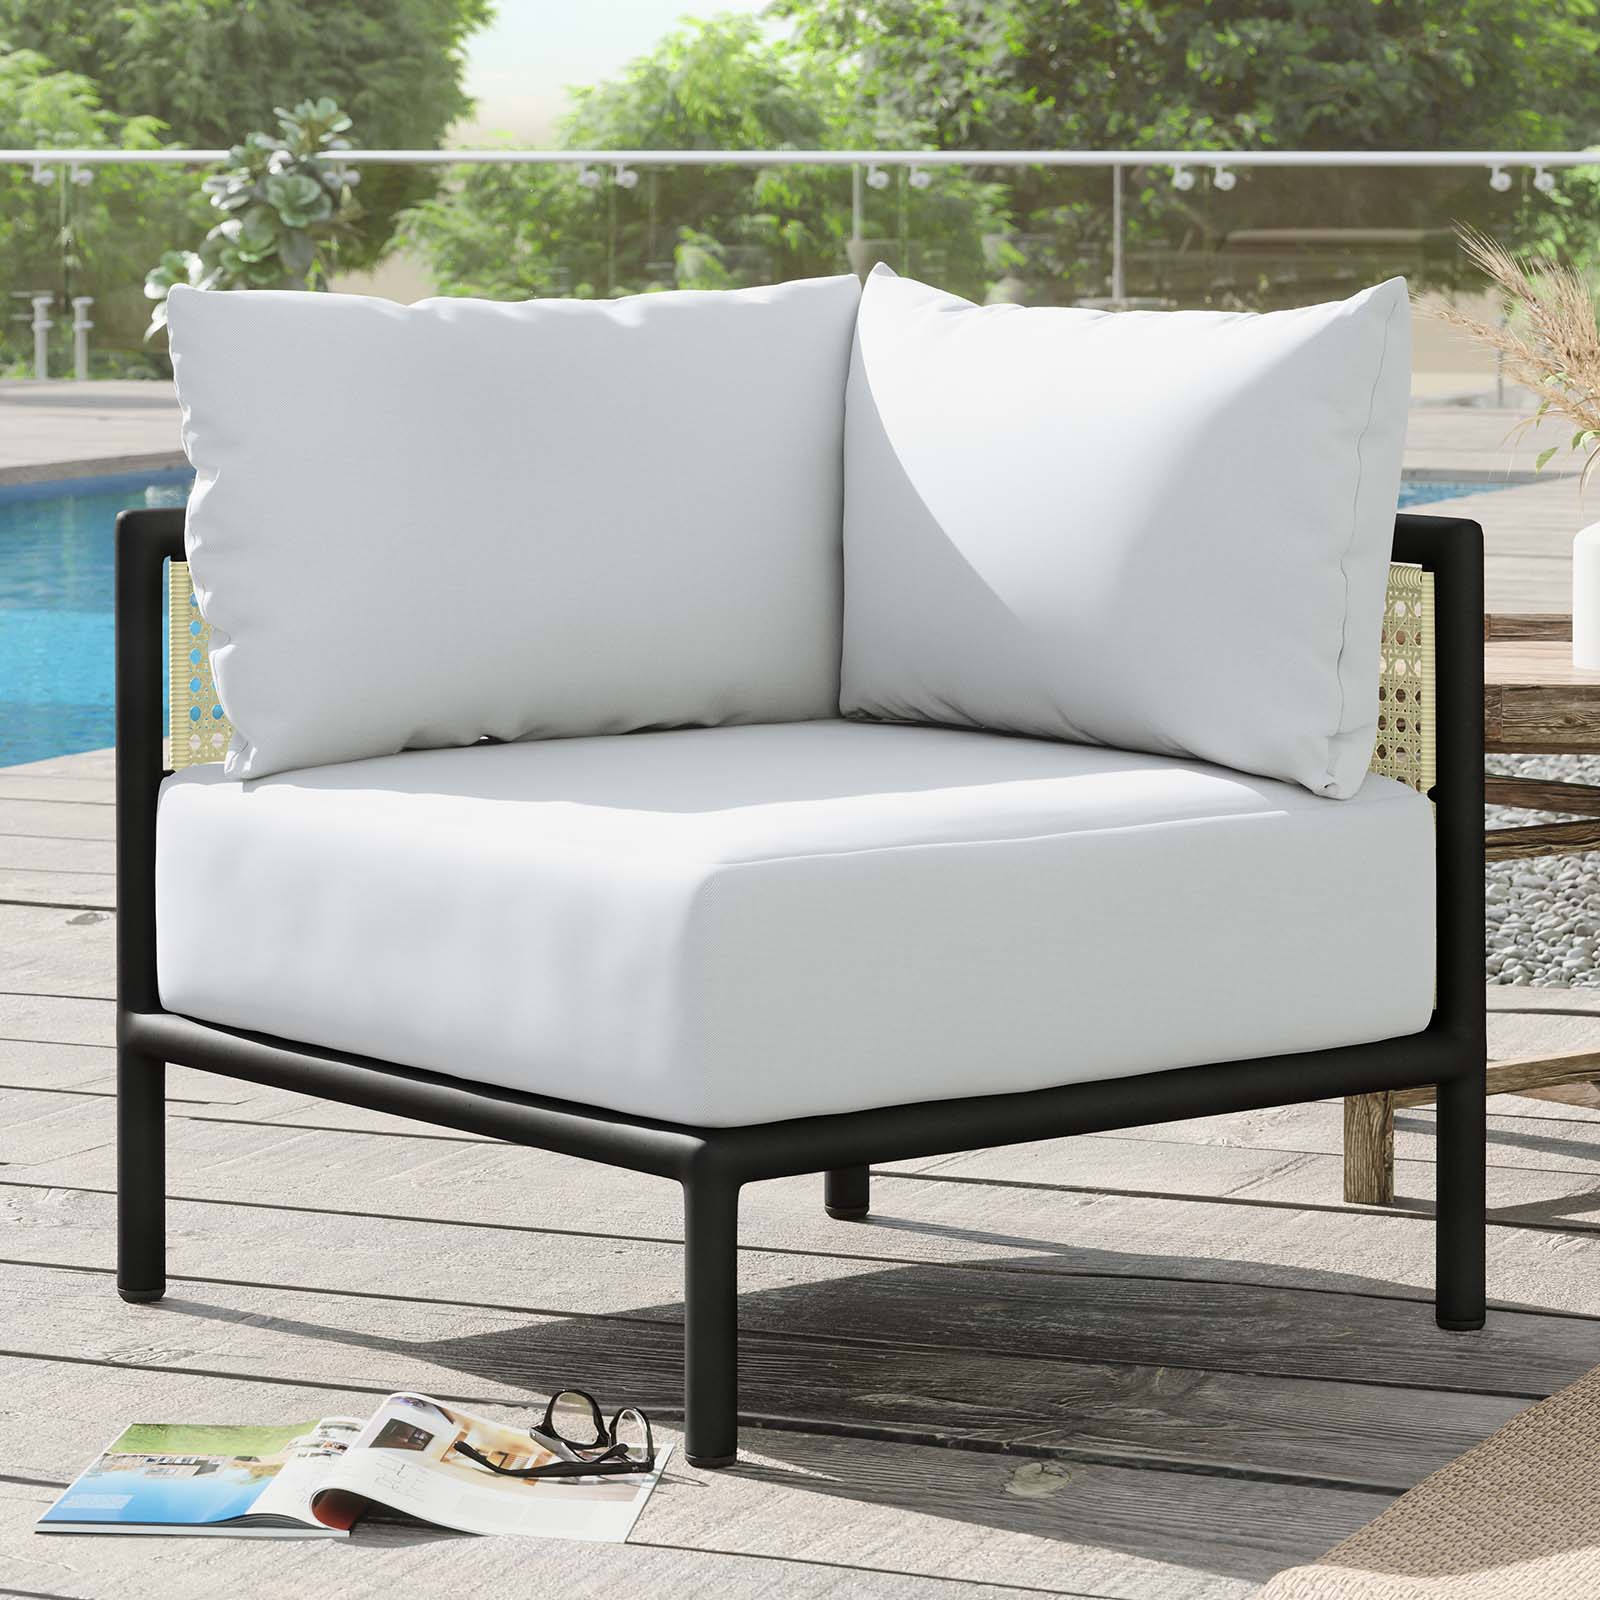 Modway Outdoor Chairs - Hanalei Outdoor Patio Corner Chair Ivory White